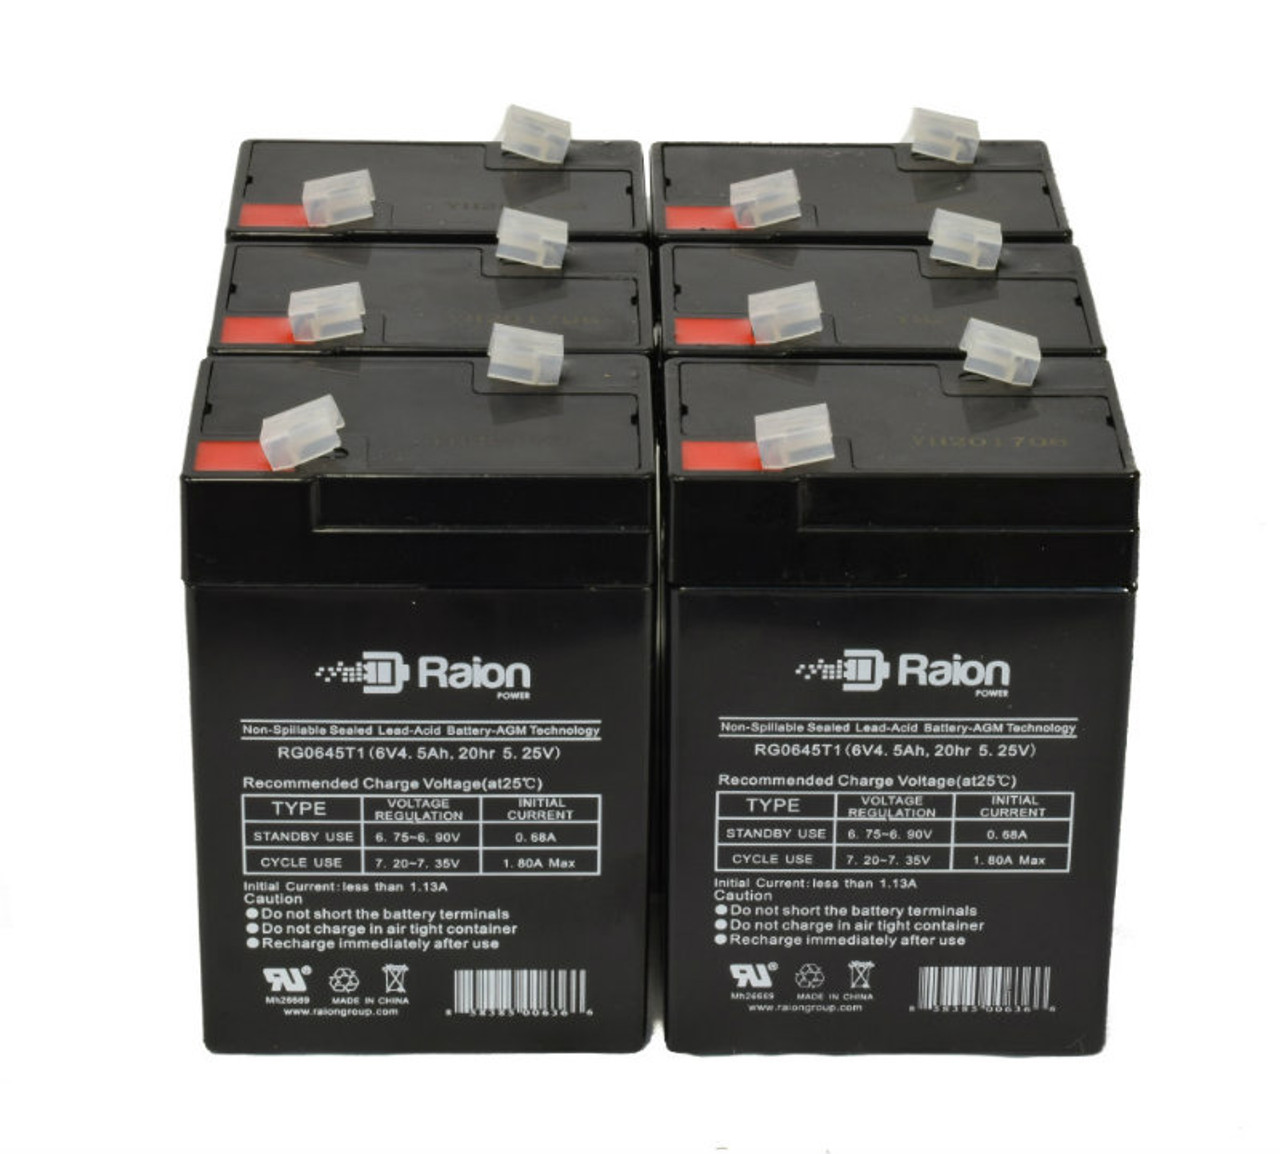 Raion Power 6 Volt 4.5Ah RG0645T1 Replacement Battery for EaglePicher CF-6V4.5 - 6 Pack